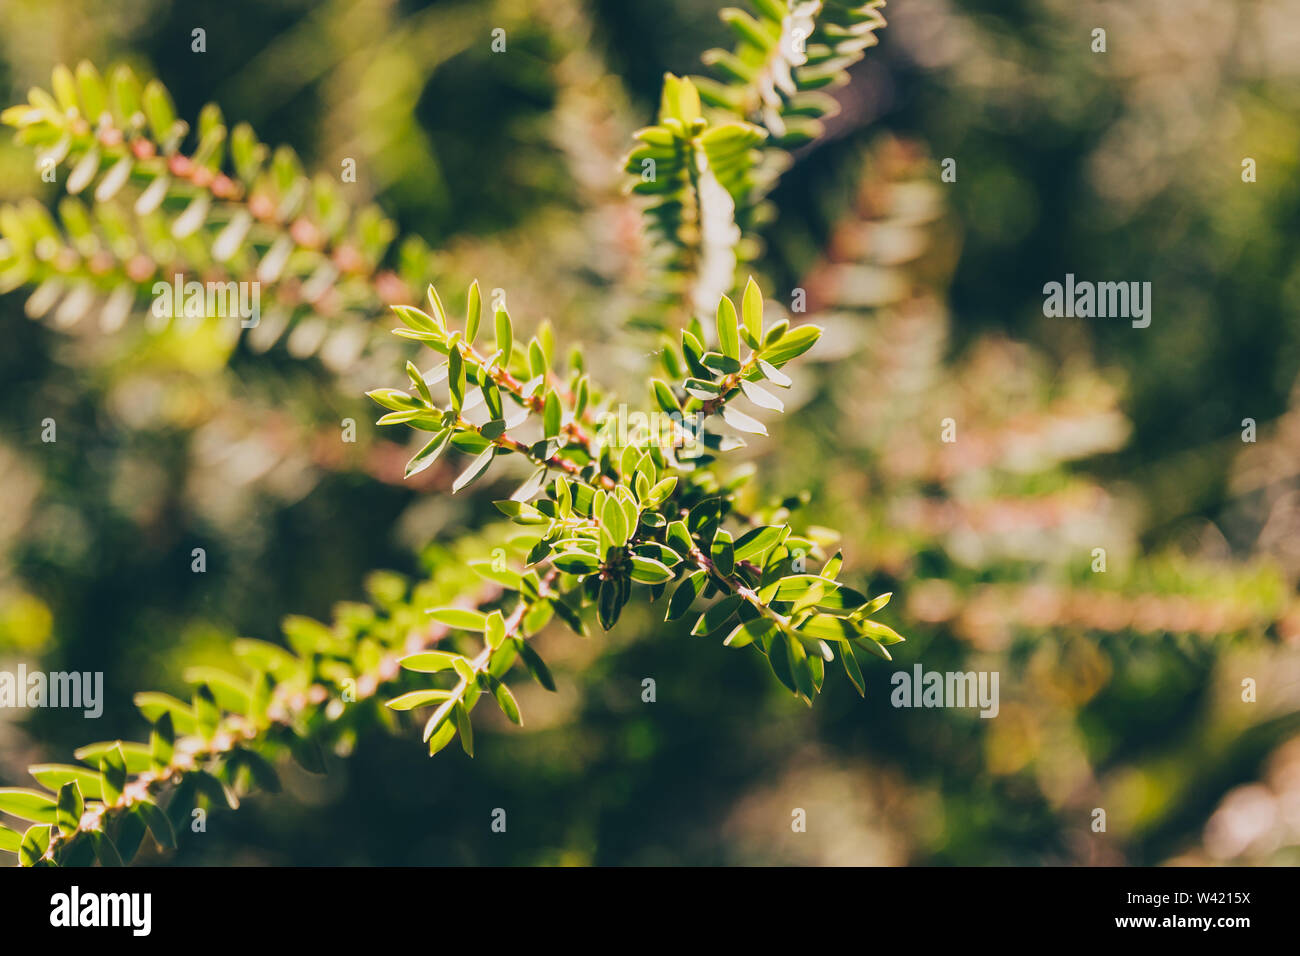 eutaxia obovata (also called egg and bacon plant) with green spiky leaves, shot at shallow depth of field Stock Photo